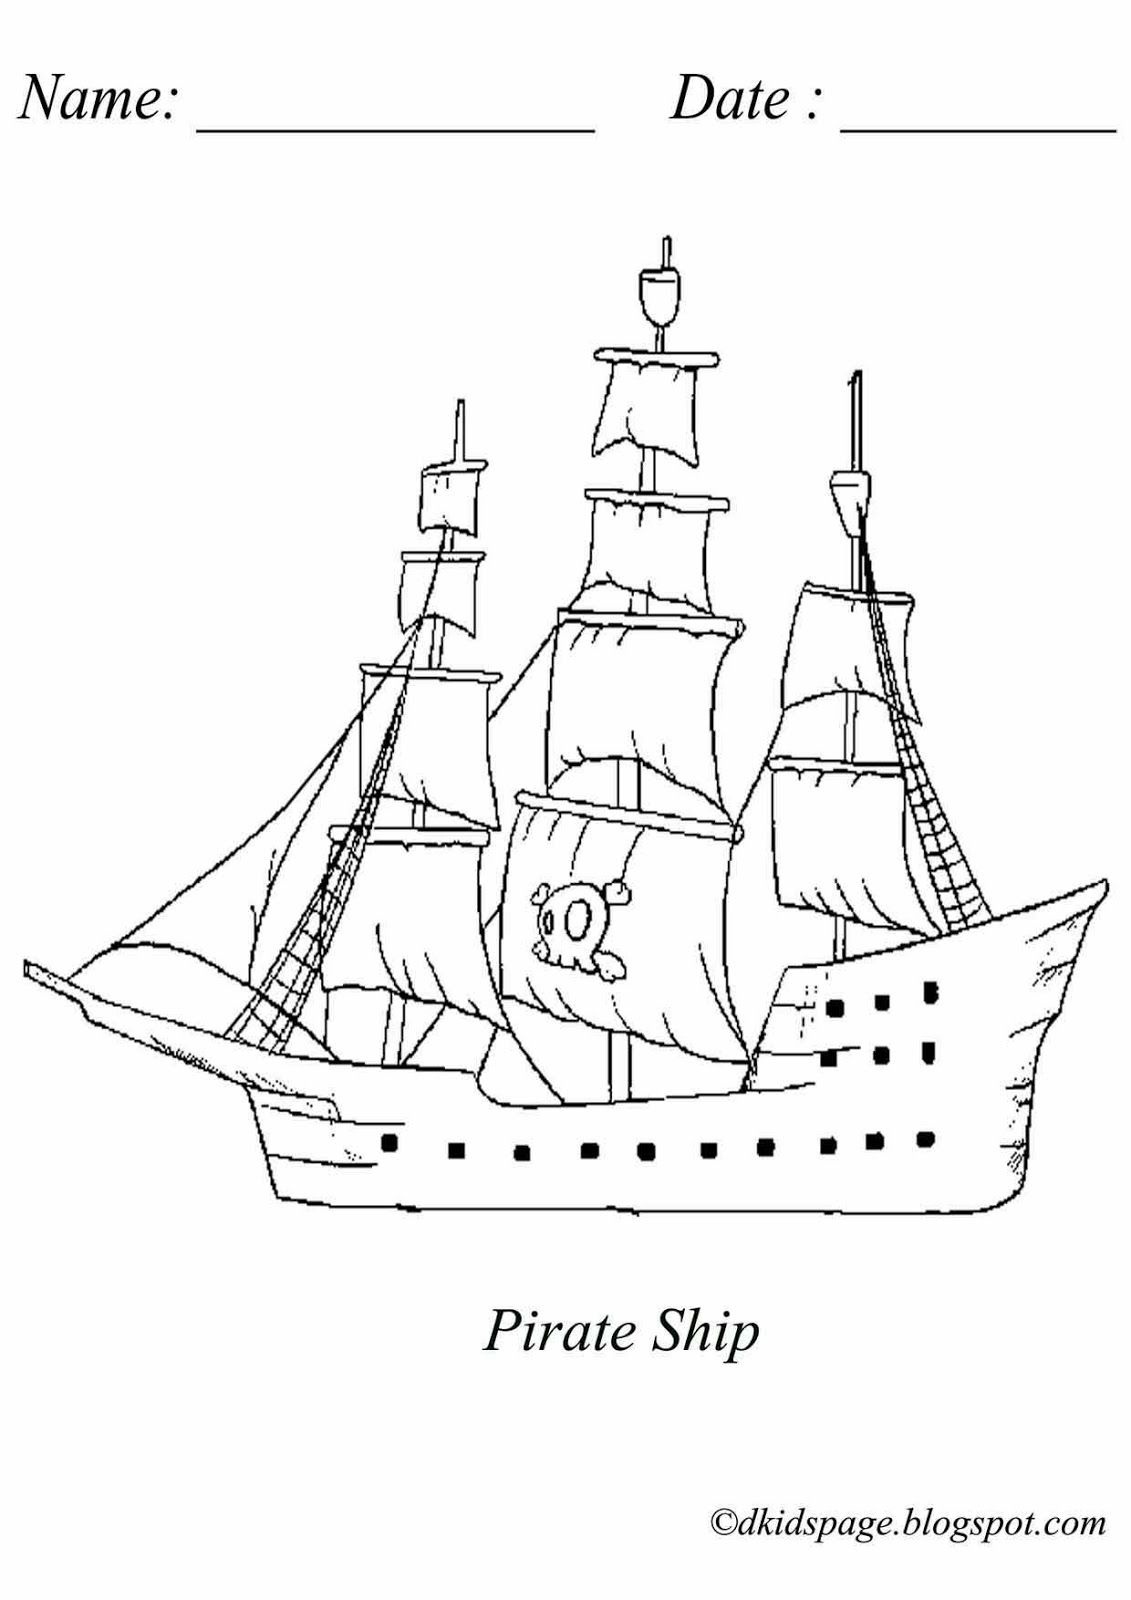 Coloring Picture Of Pirate Ship. Download Free Printable Pirate Ship - Free Printable Boat Pictures